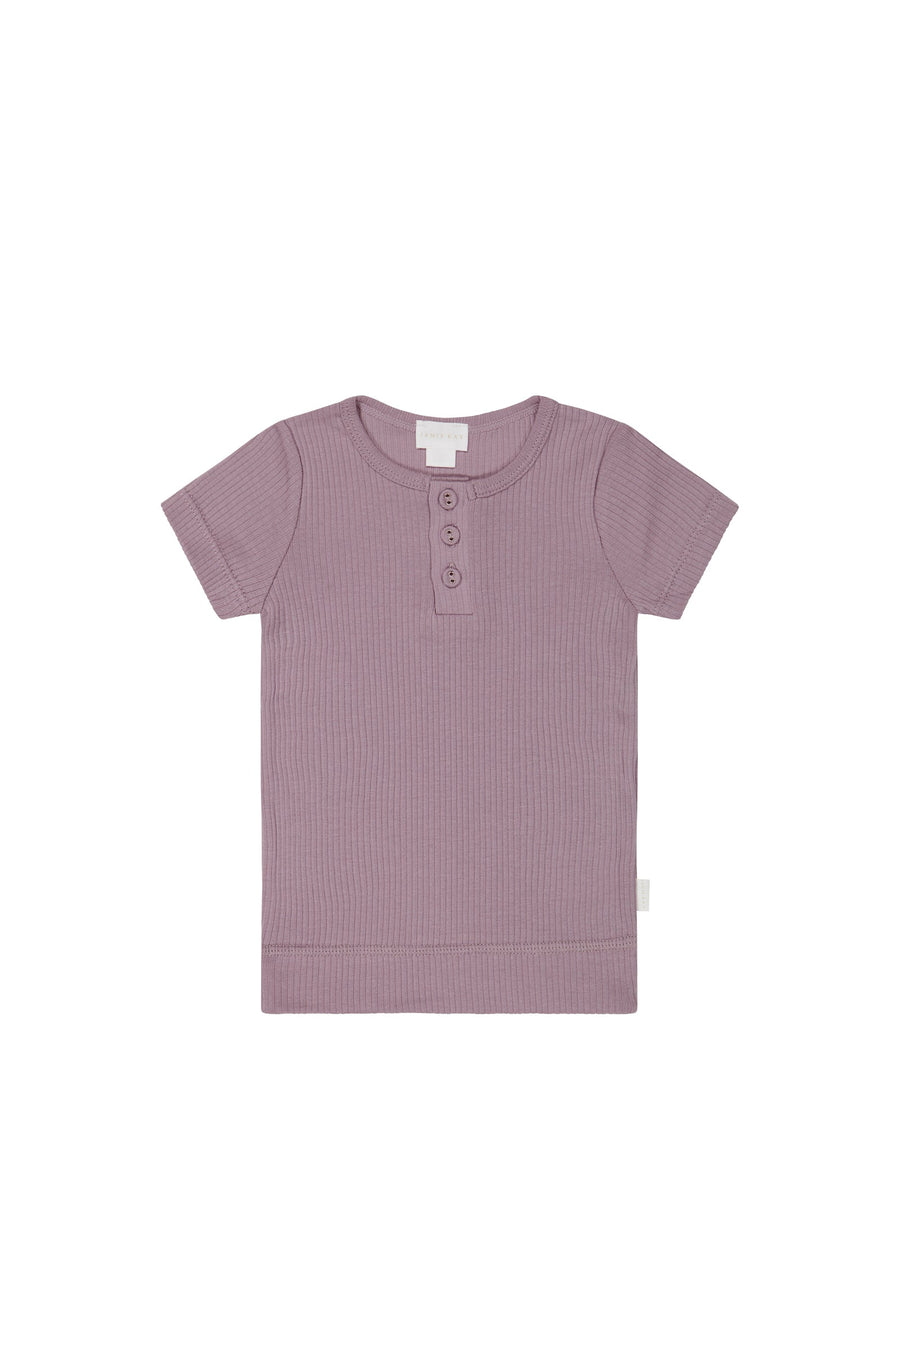 Organic Cotton Modal Henley Tee - Melody Childrens Top from Jamie Kay USA